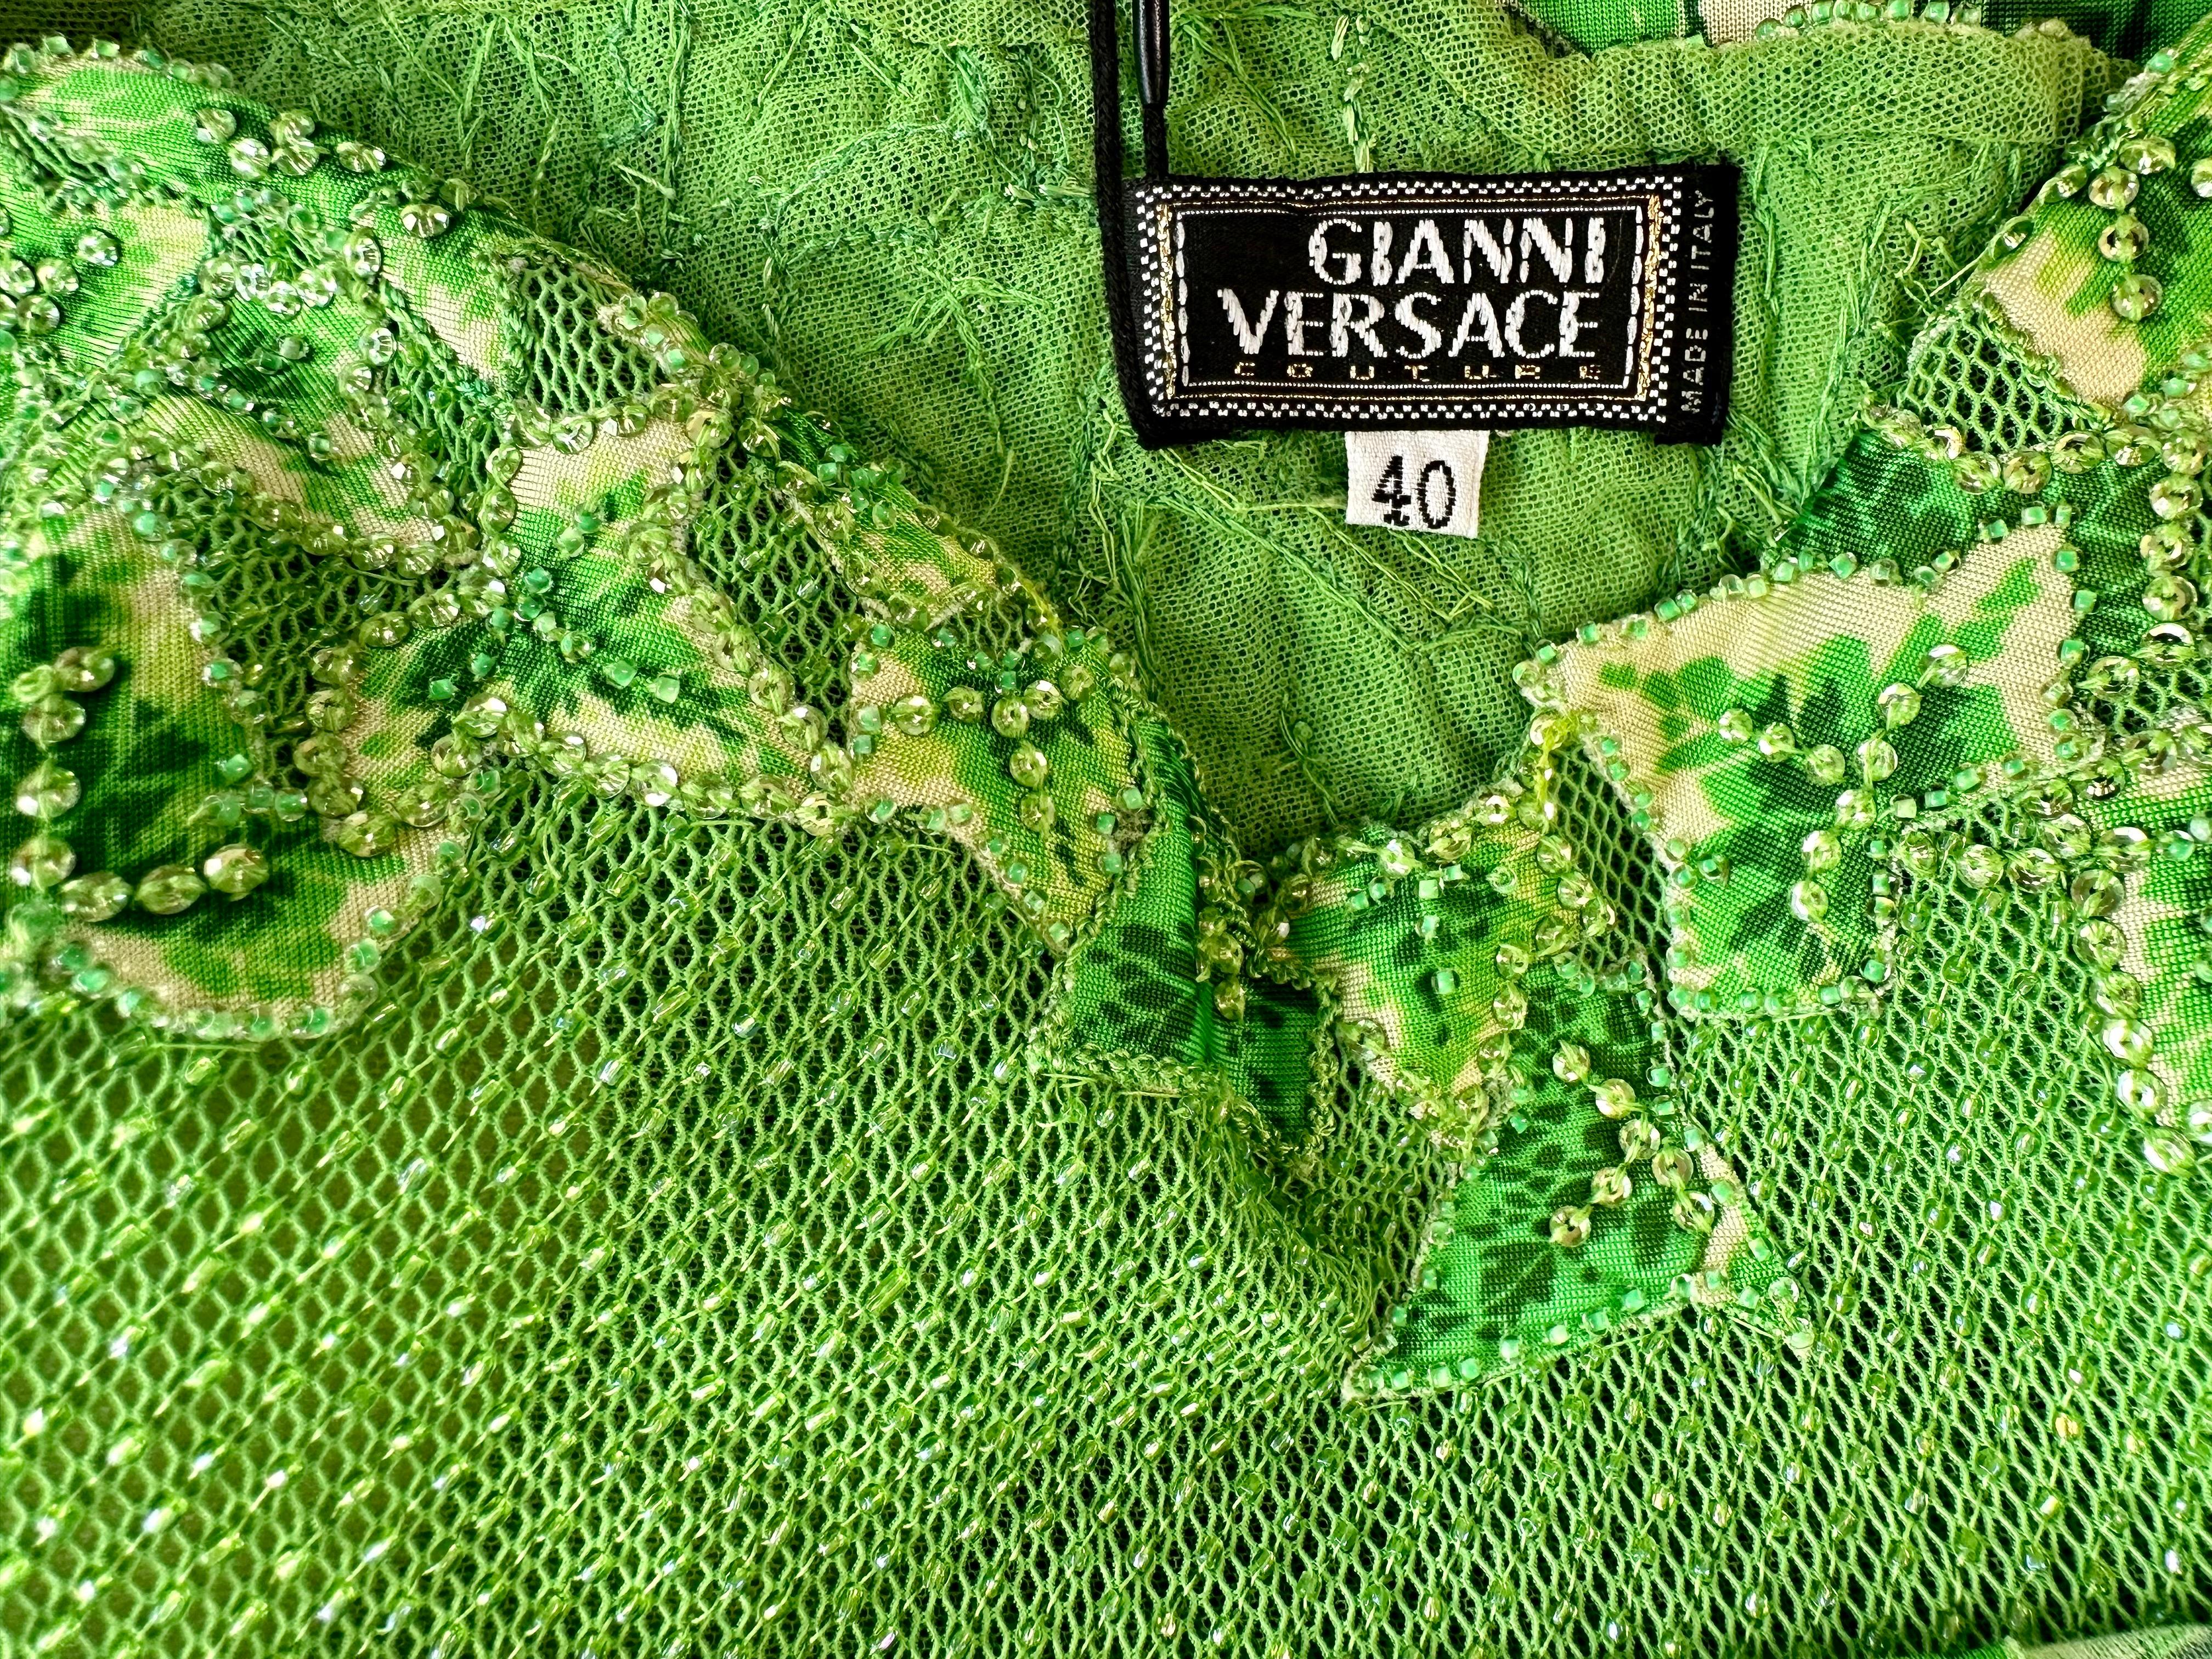 Gianni Versace S/S 1997 Runway Embellished Sheer Lace Shawl Evening Dress Gown  For Sale 9